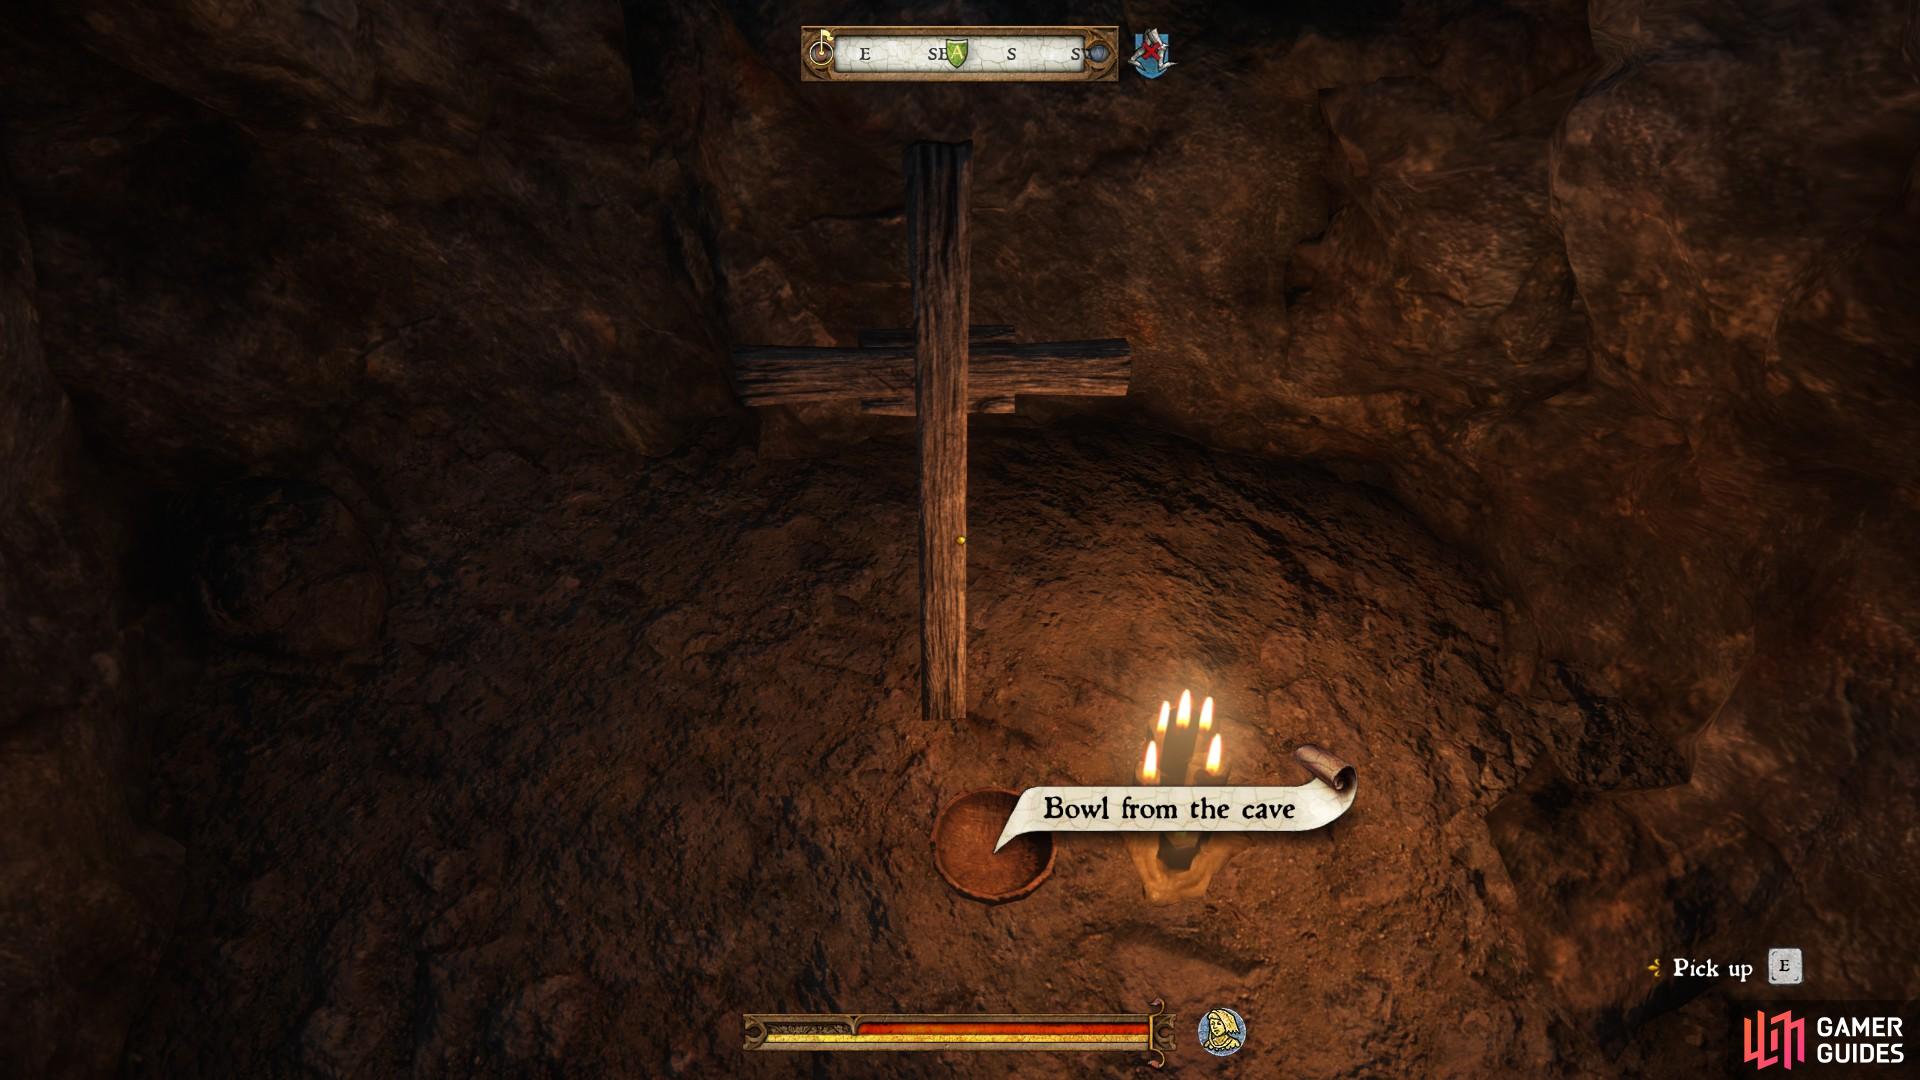 Once inside, you will find a small bowl beneath a cross. Pick it up to trigger the next phase of the quest.